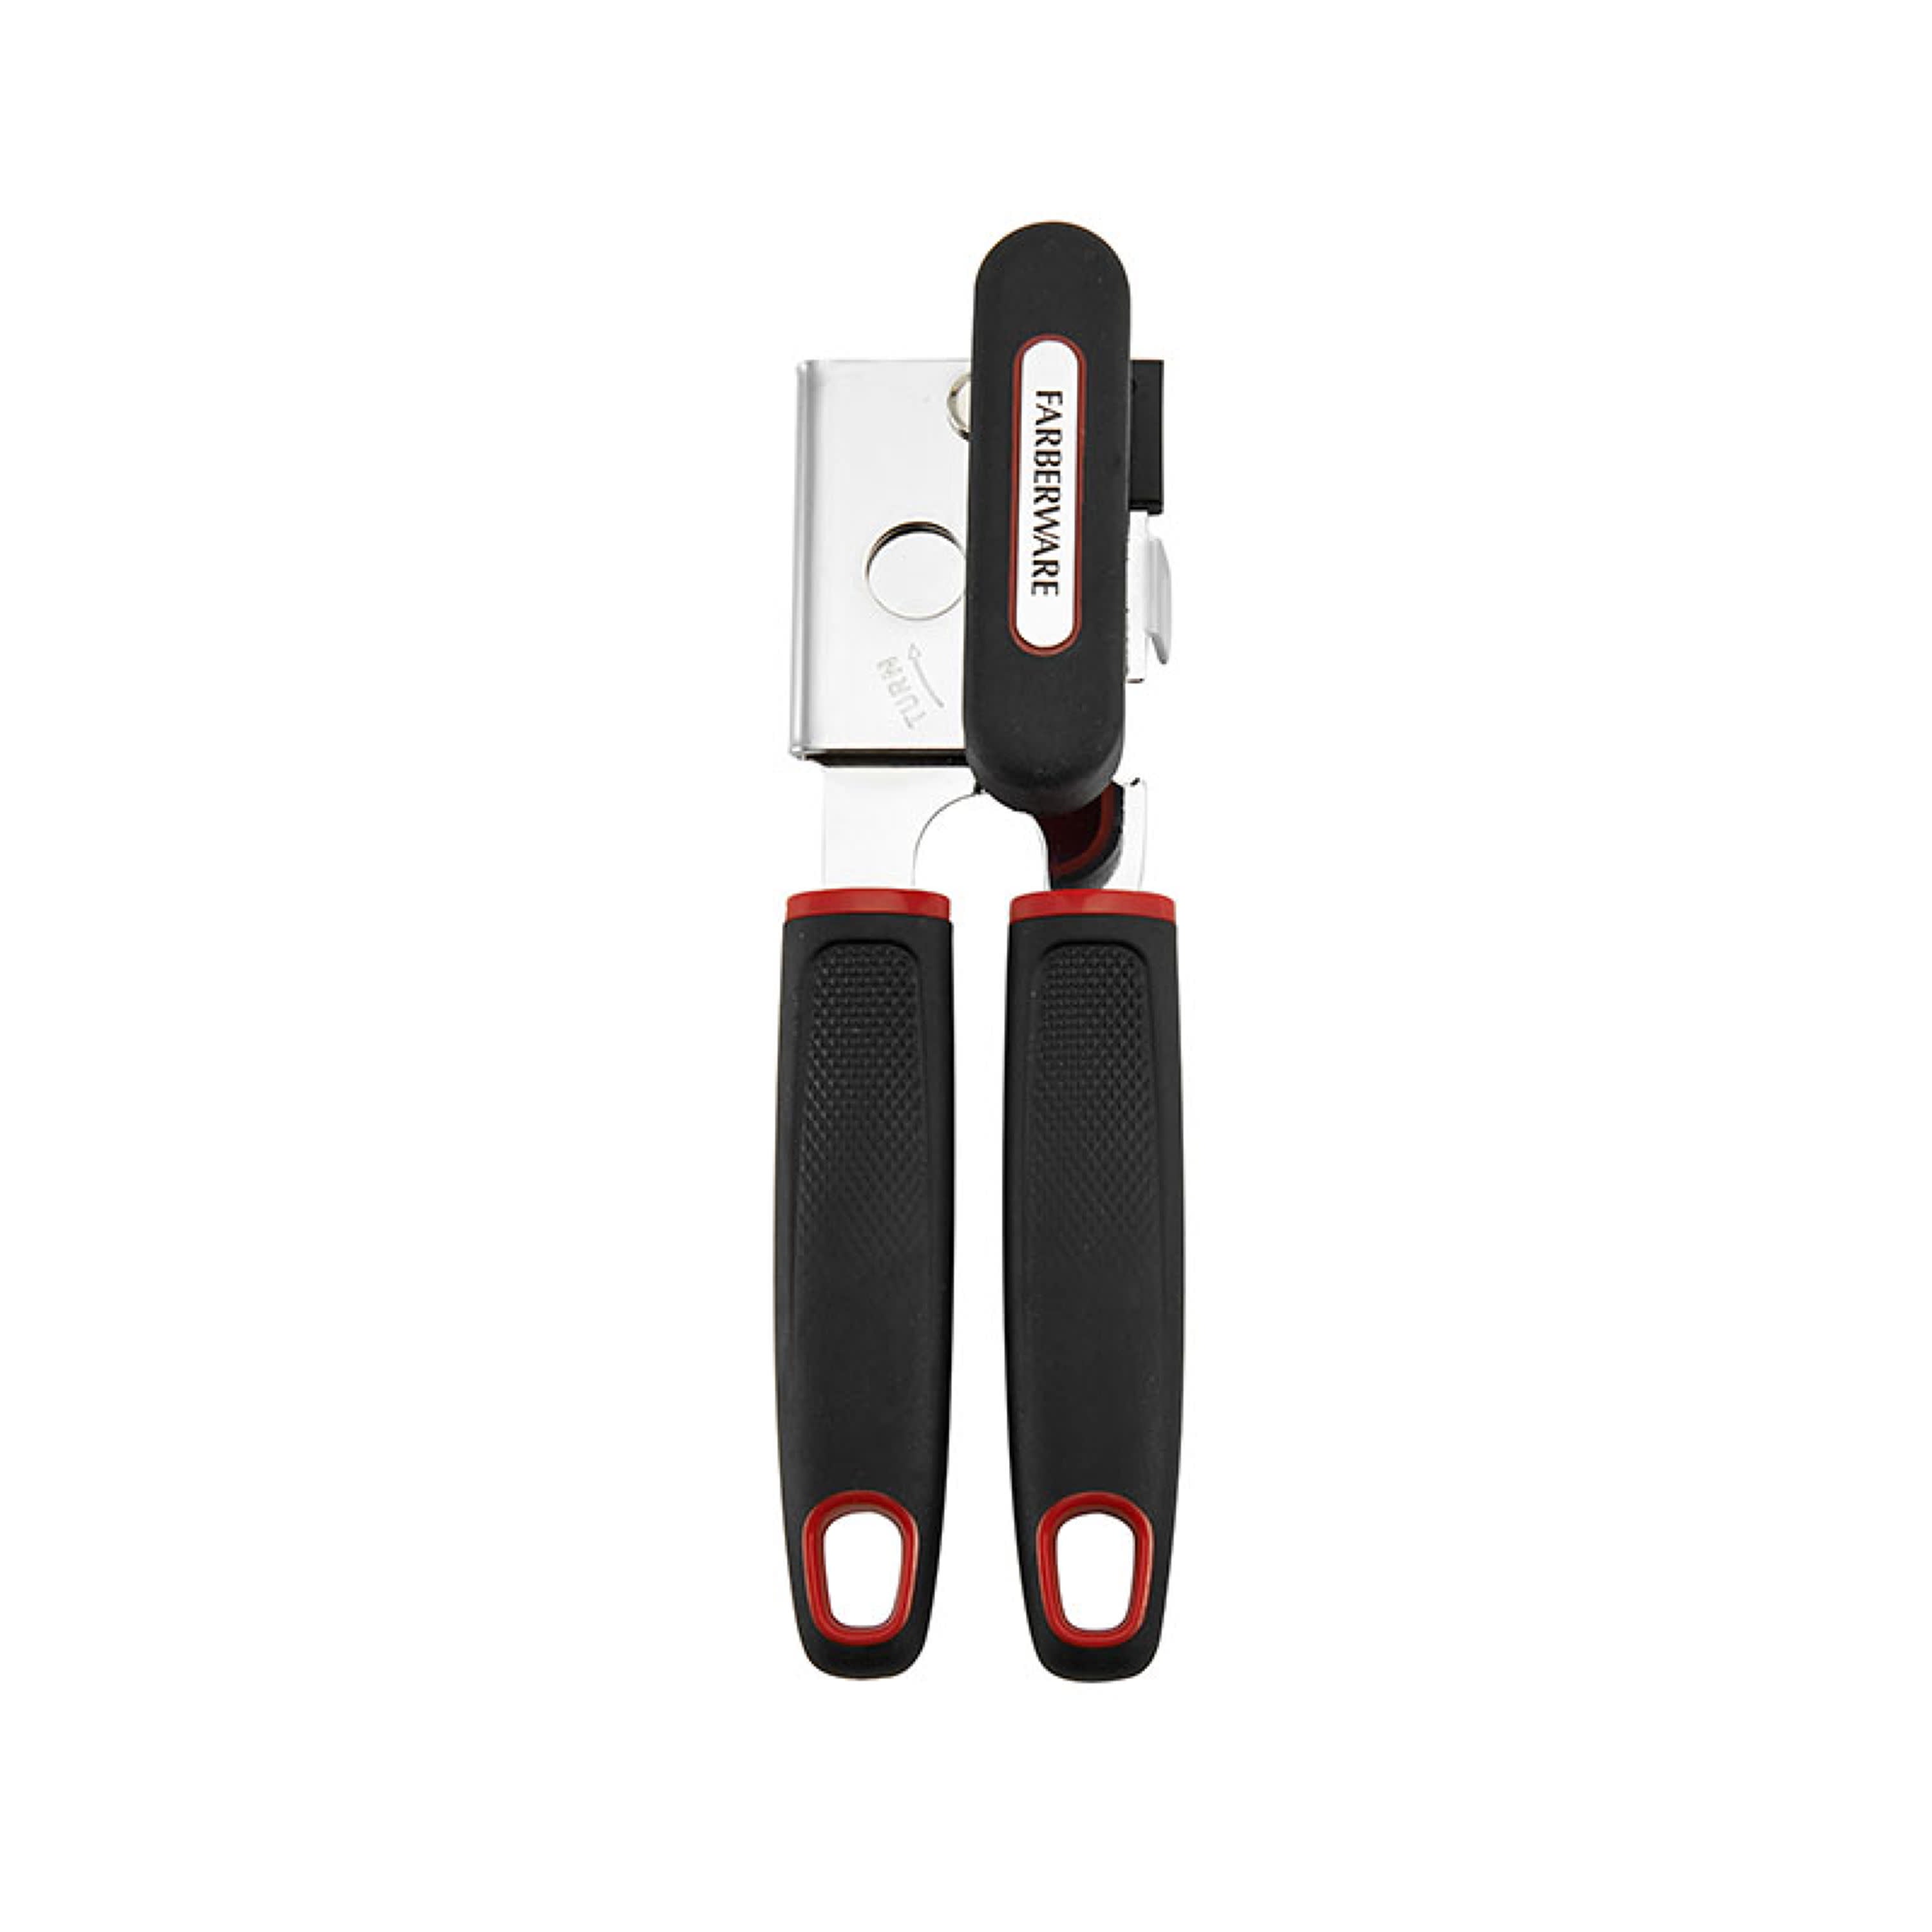 Farberware Soft Grips Can Opener in Black with Red Accents